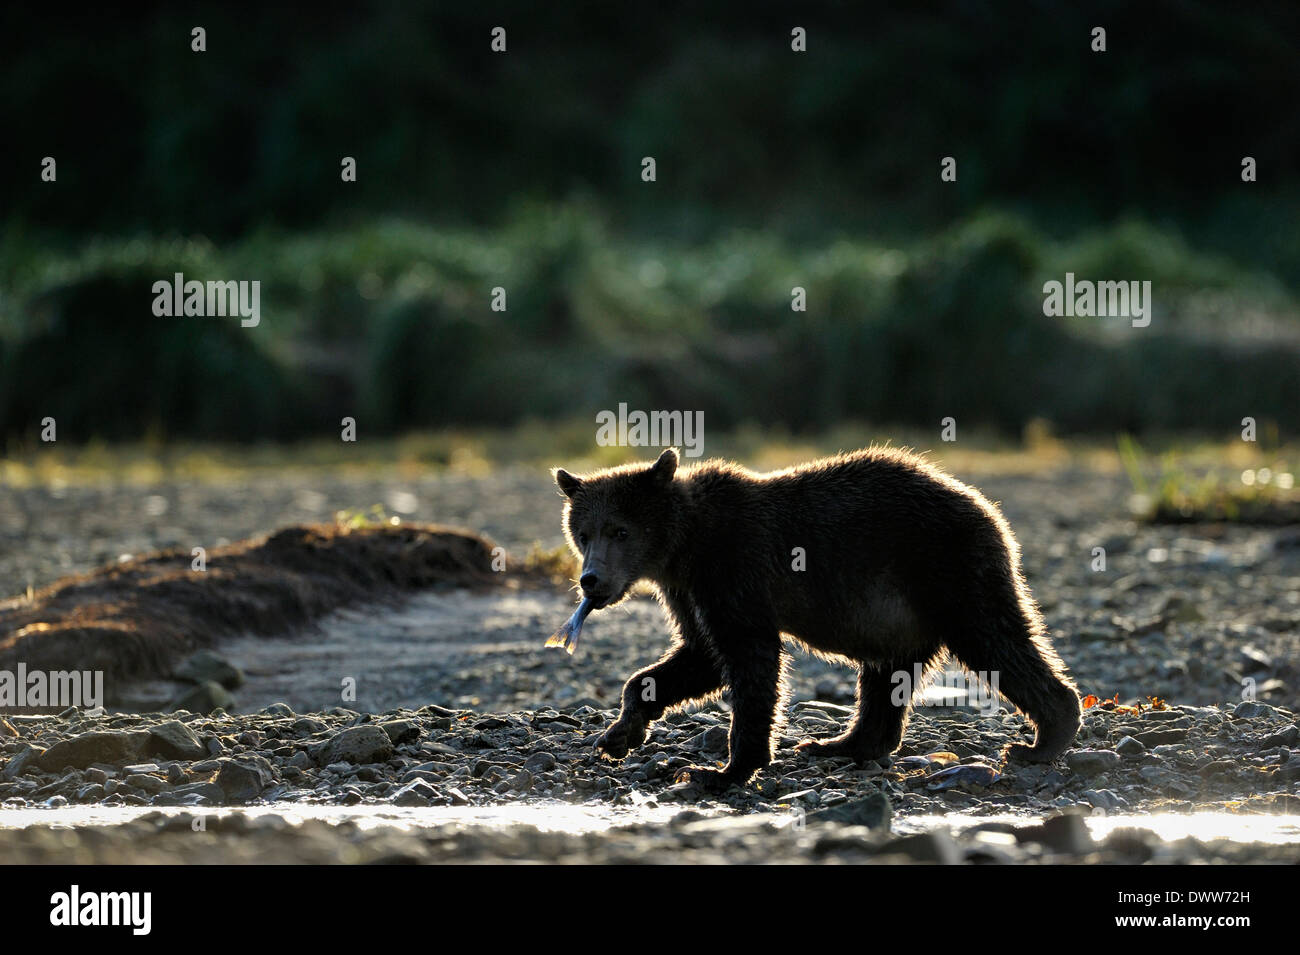 Juvenile Grizzly bear (Ursus arctos horribilis) walking at beach with fish and back light. Stock Photo